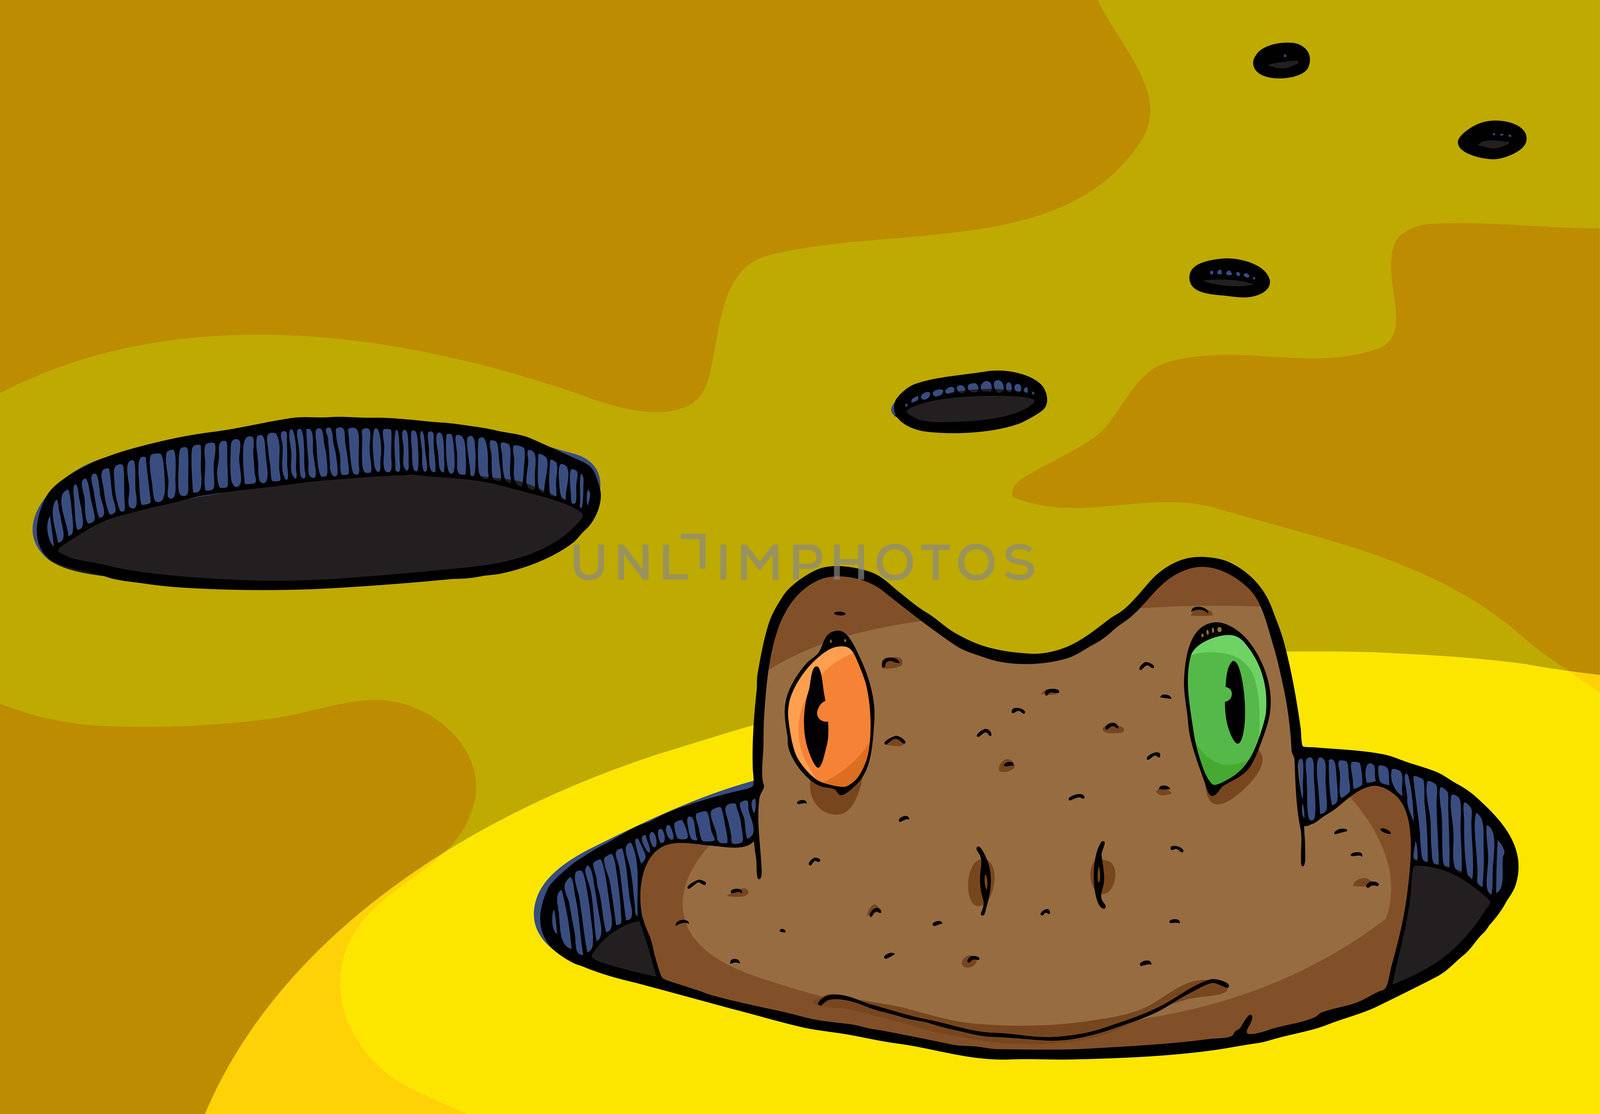 An orange and green-eyed toad pops up from a hole